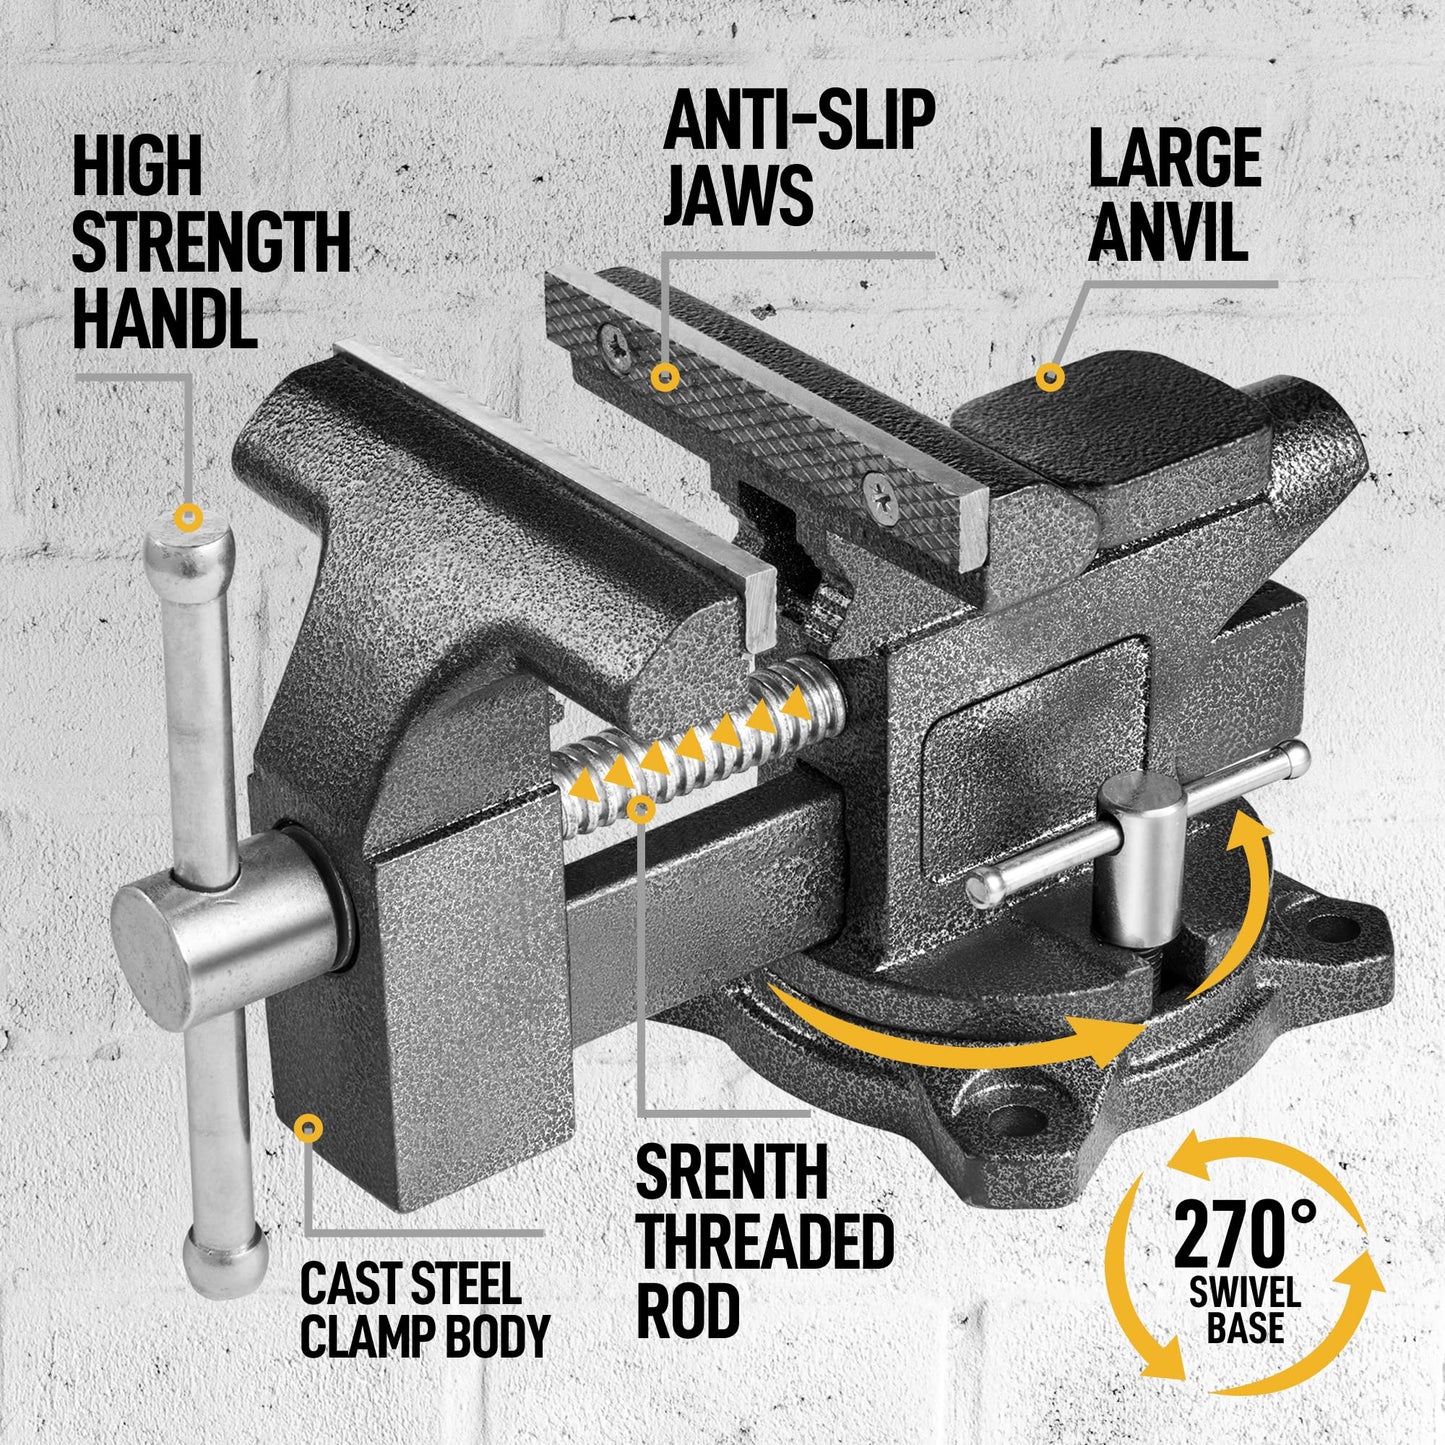 Bench Vise 4-1/2", Vice for Workbench with Heavy Duty Forged Steel Construction, Built-in Pipe Jaw, Swivel Base Table Vise for Woodworking, Home